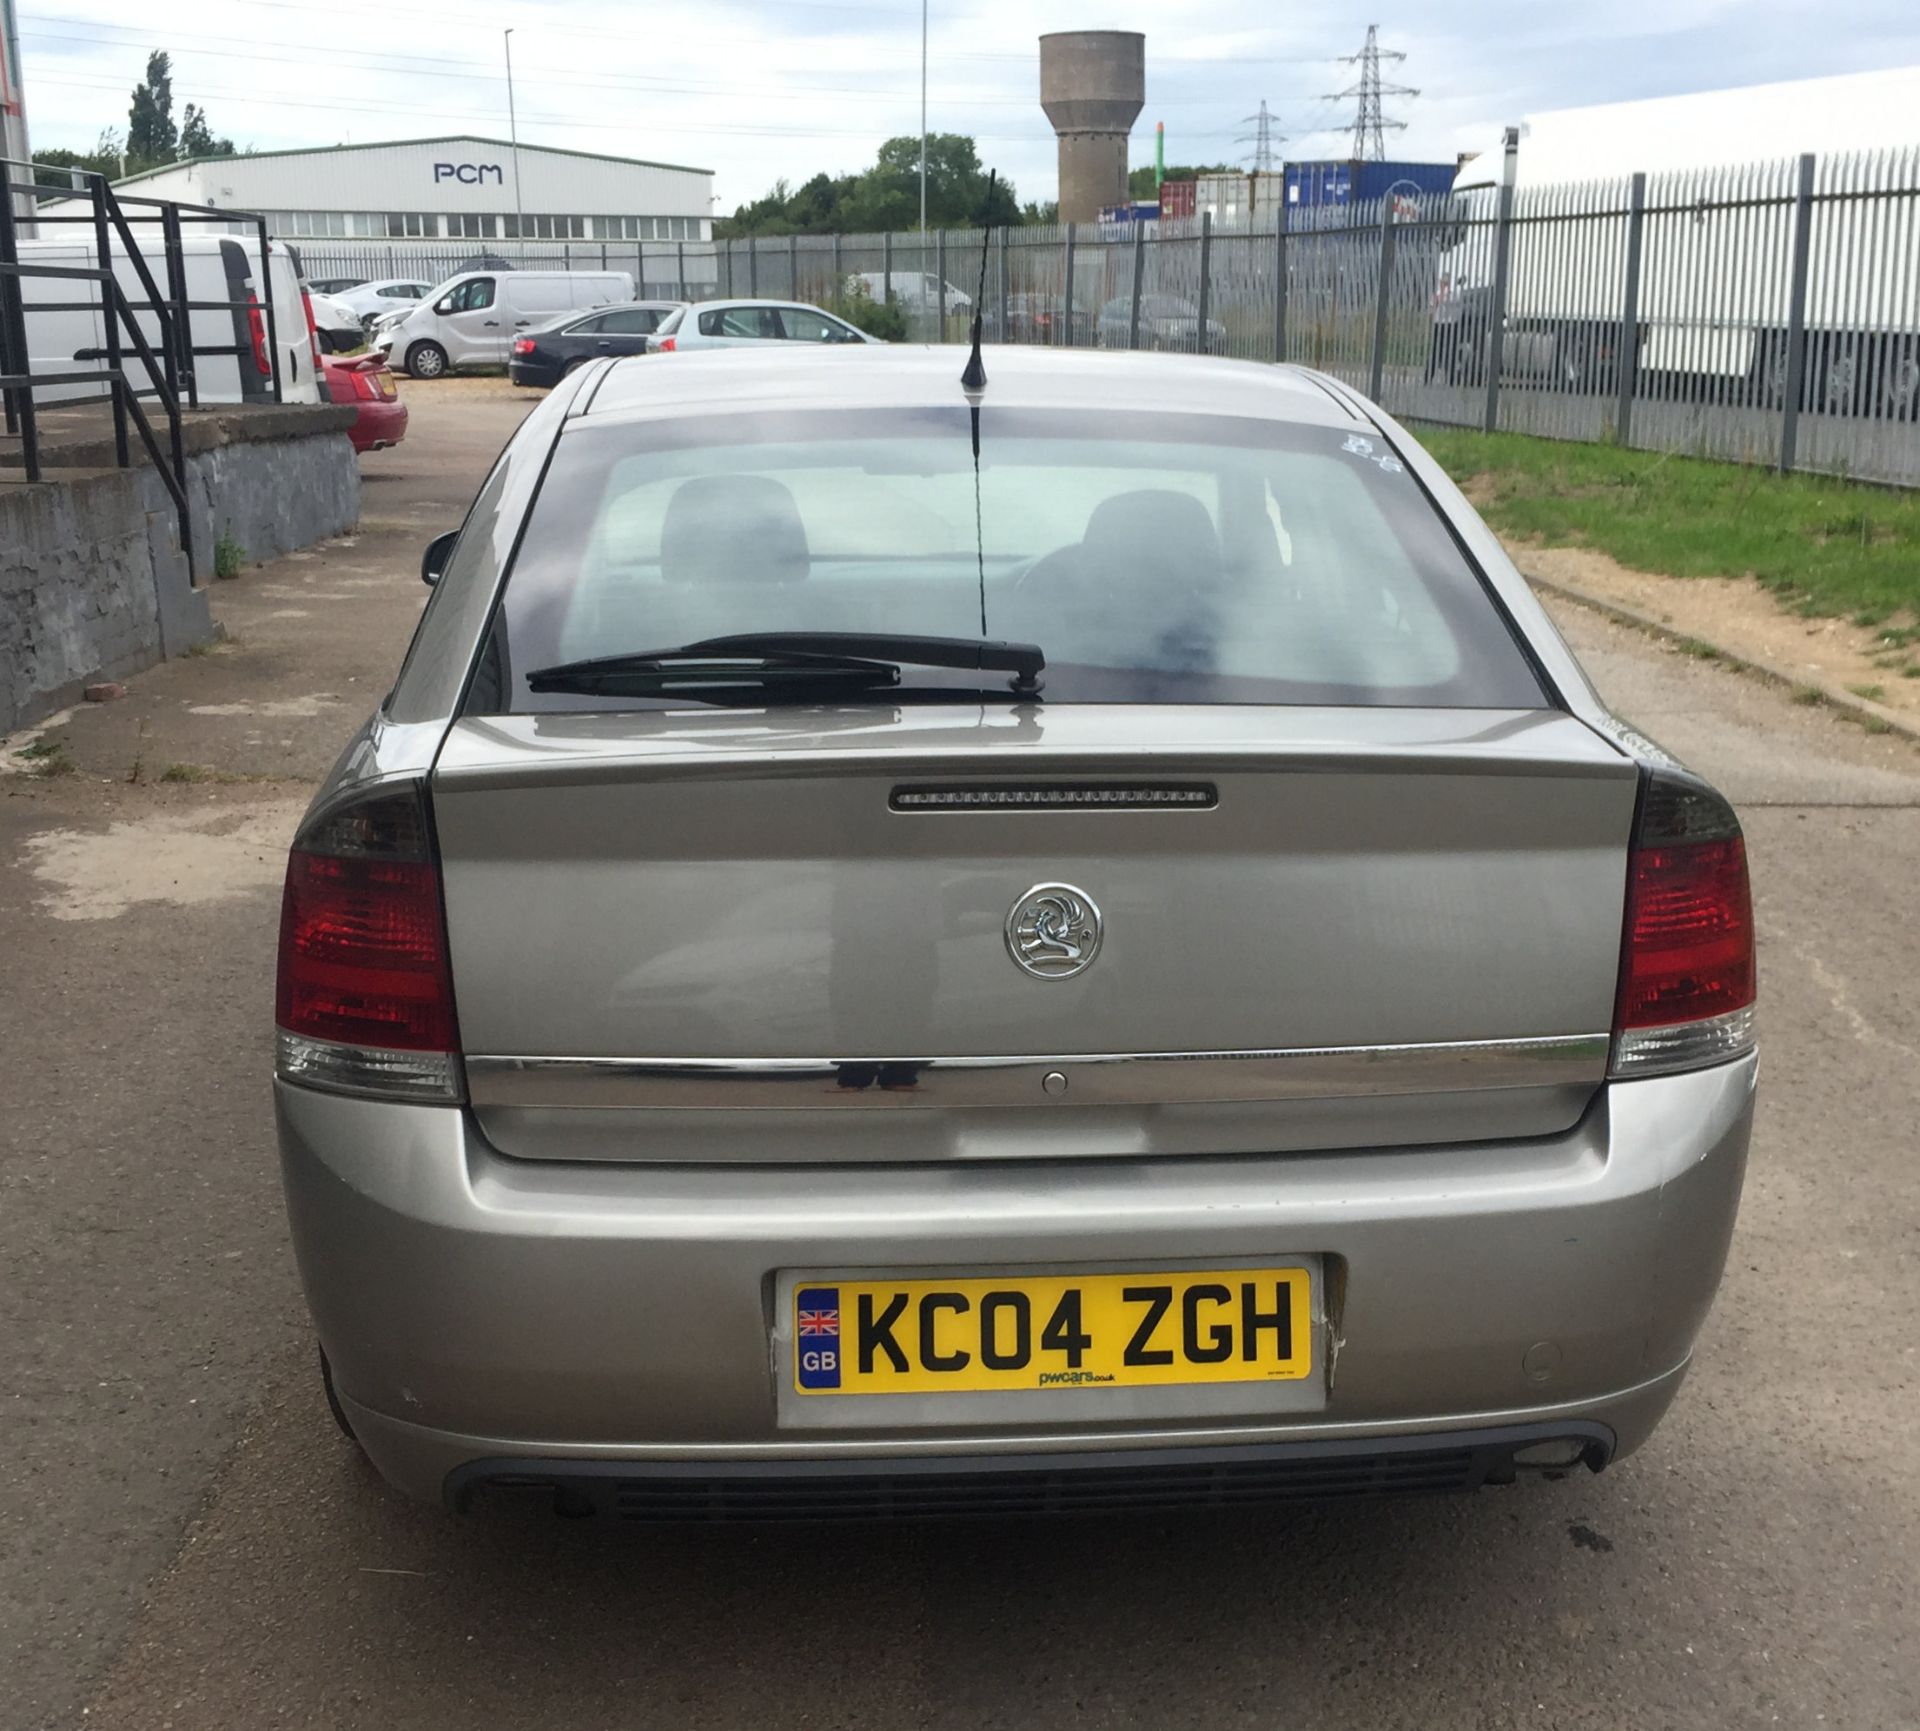 2004 Vauxhall Vectra 2.2 Sri Automatic 4 Dr Saloon - CL505 - NO VAT ON THE HAMMER - Location: - Image 3 of 7